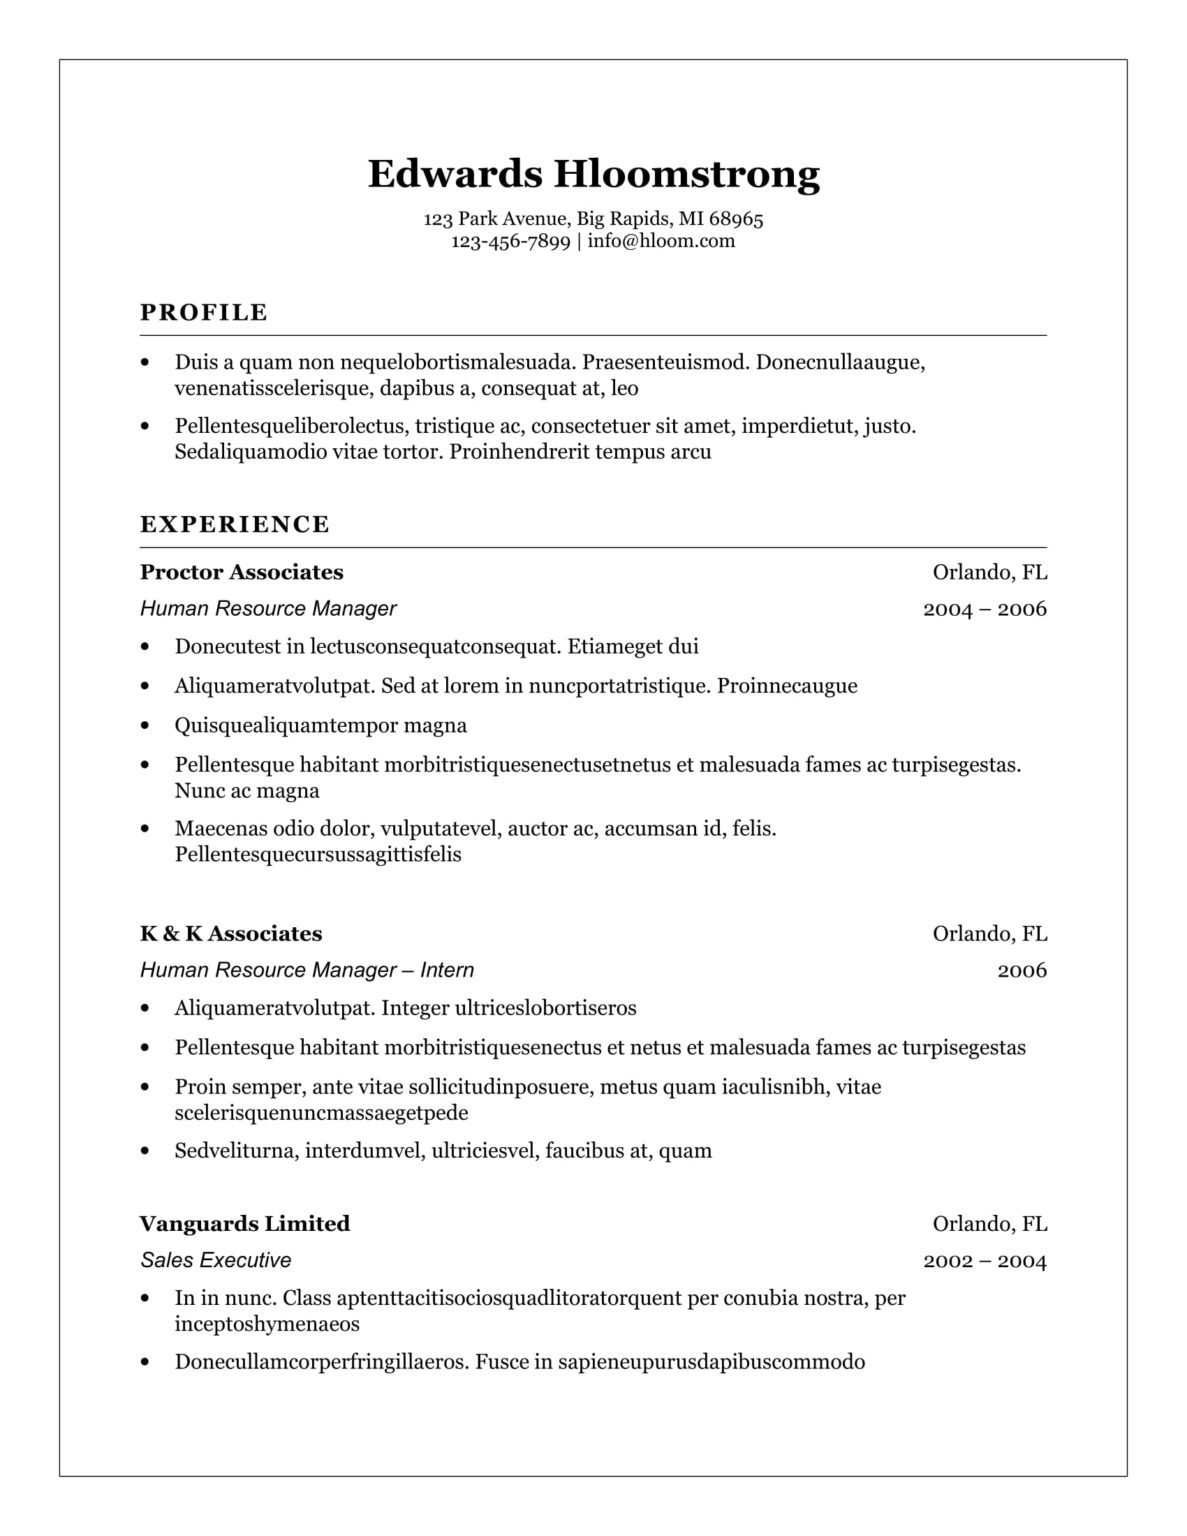 download resume template